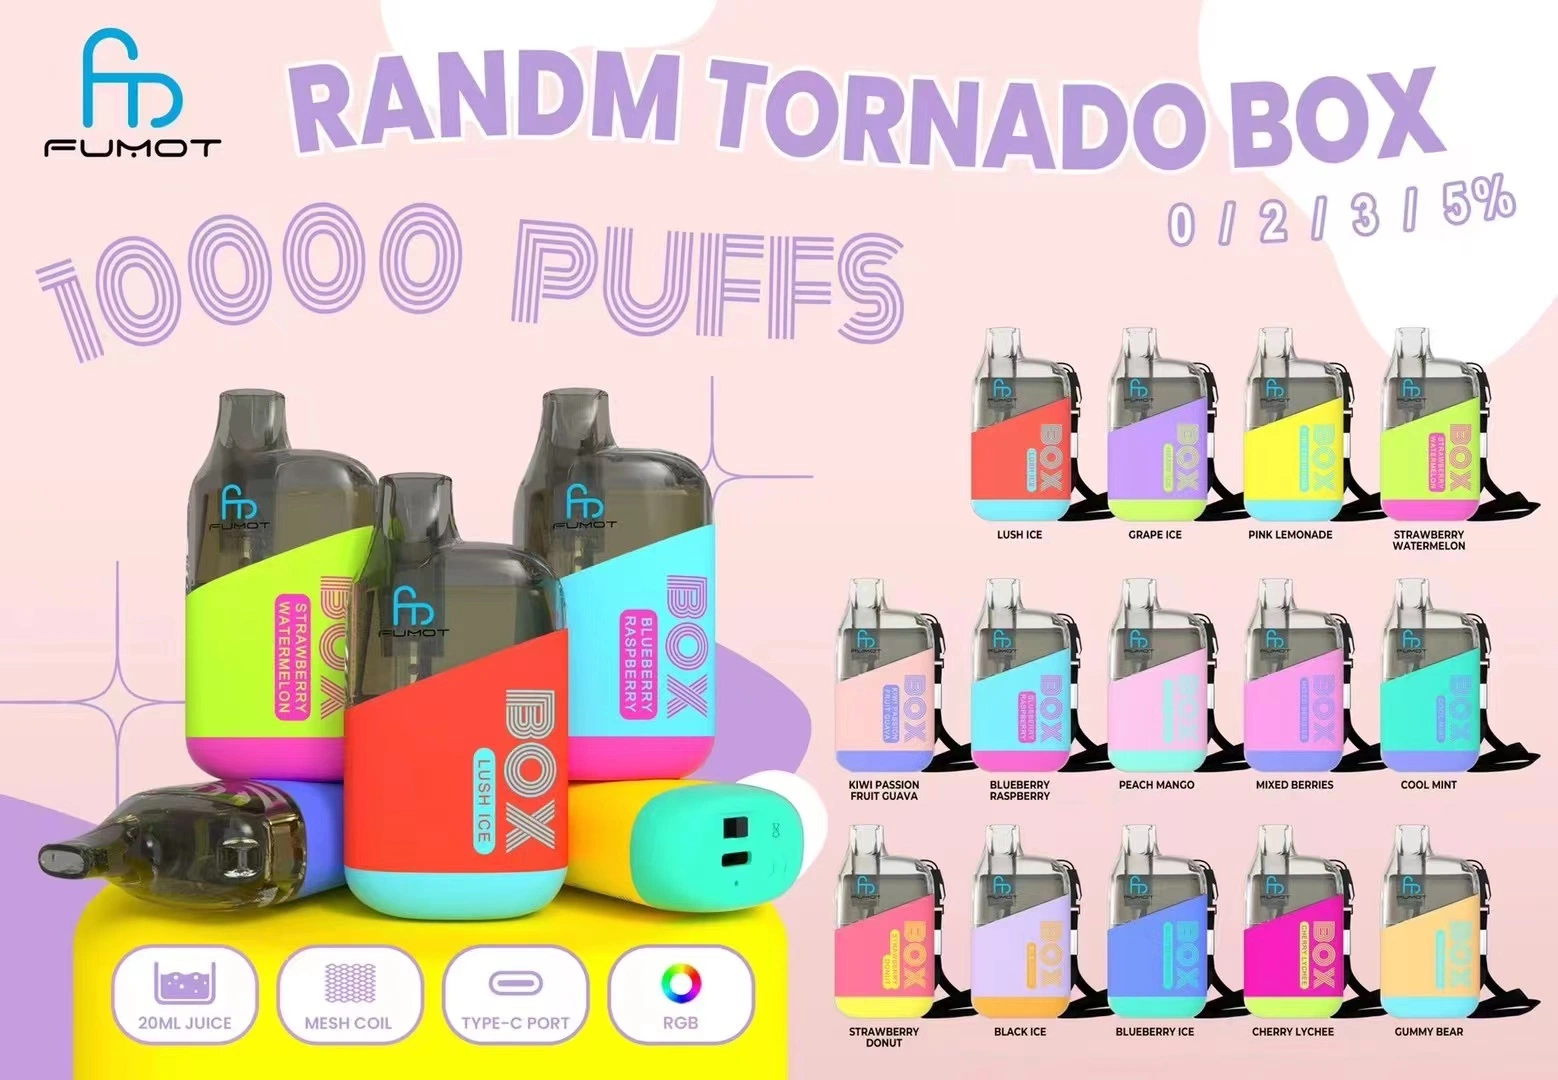 Wholesale/Supplier Factory Price 10000 Puffs Fumot Tornado Box Mesh Coil RGB Light Disposable/Chargeable Vapes